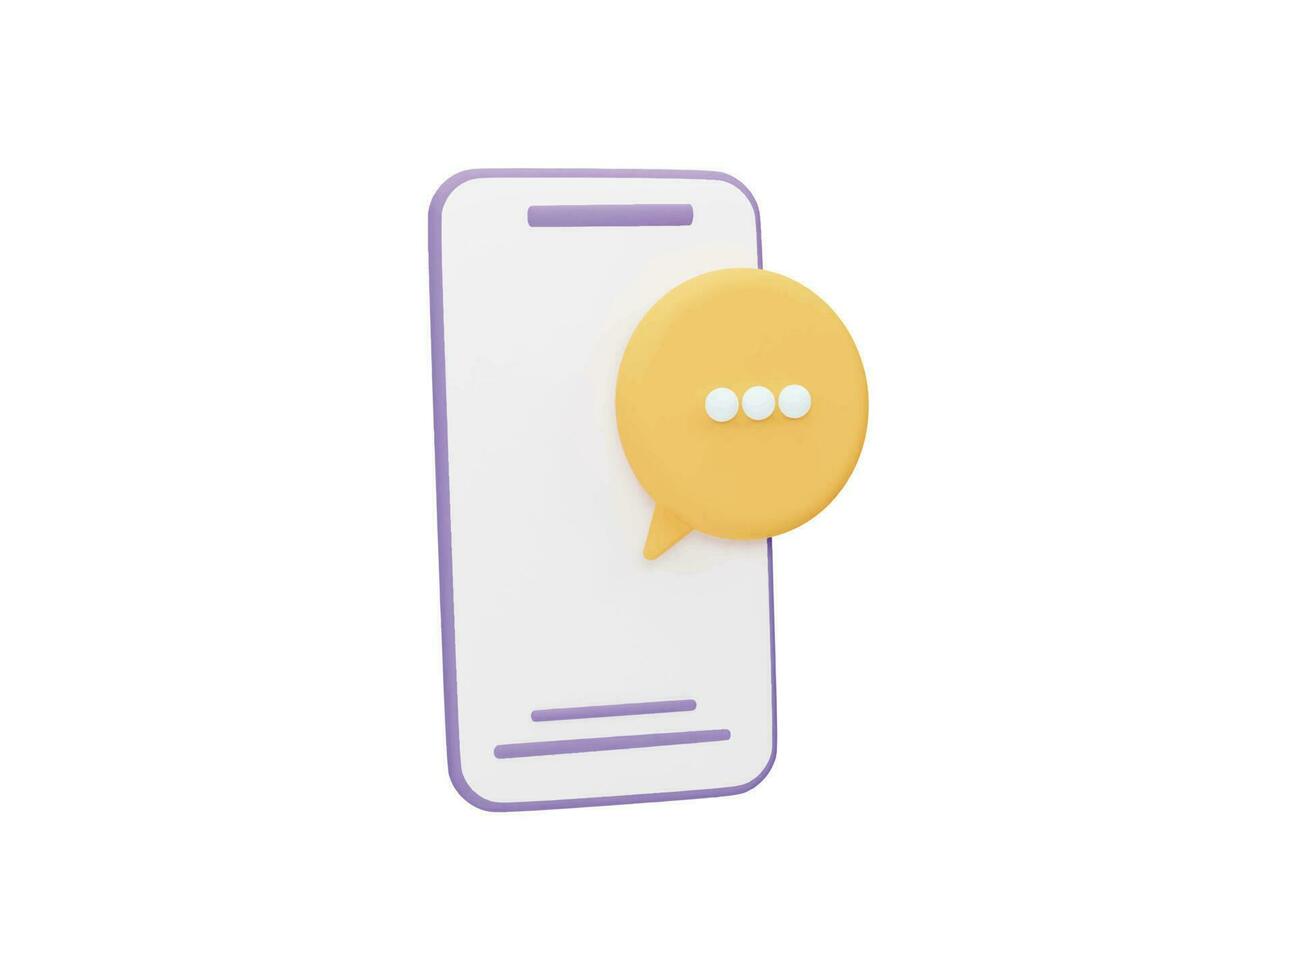 chat box and phone with 3d vector icon cartoon minimal style